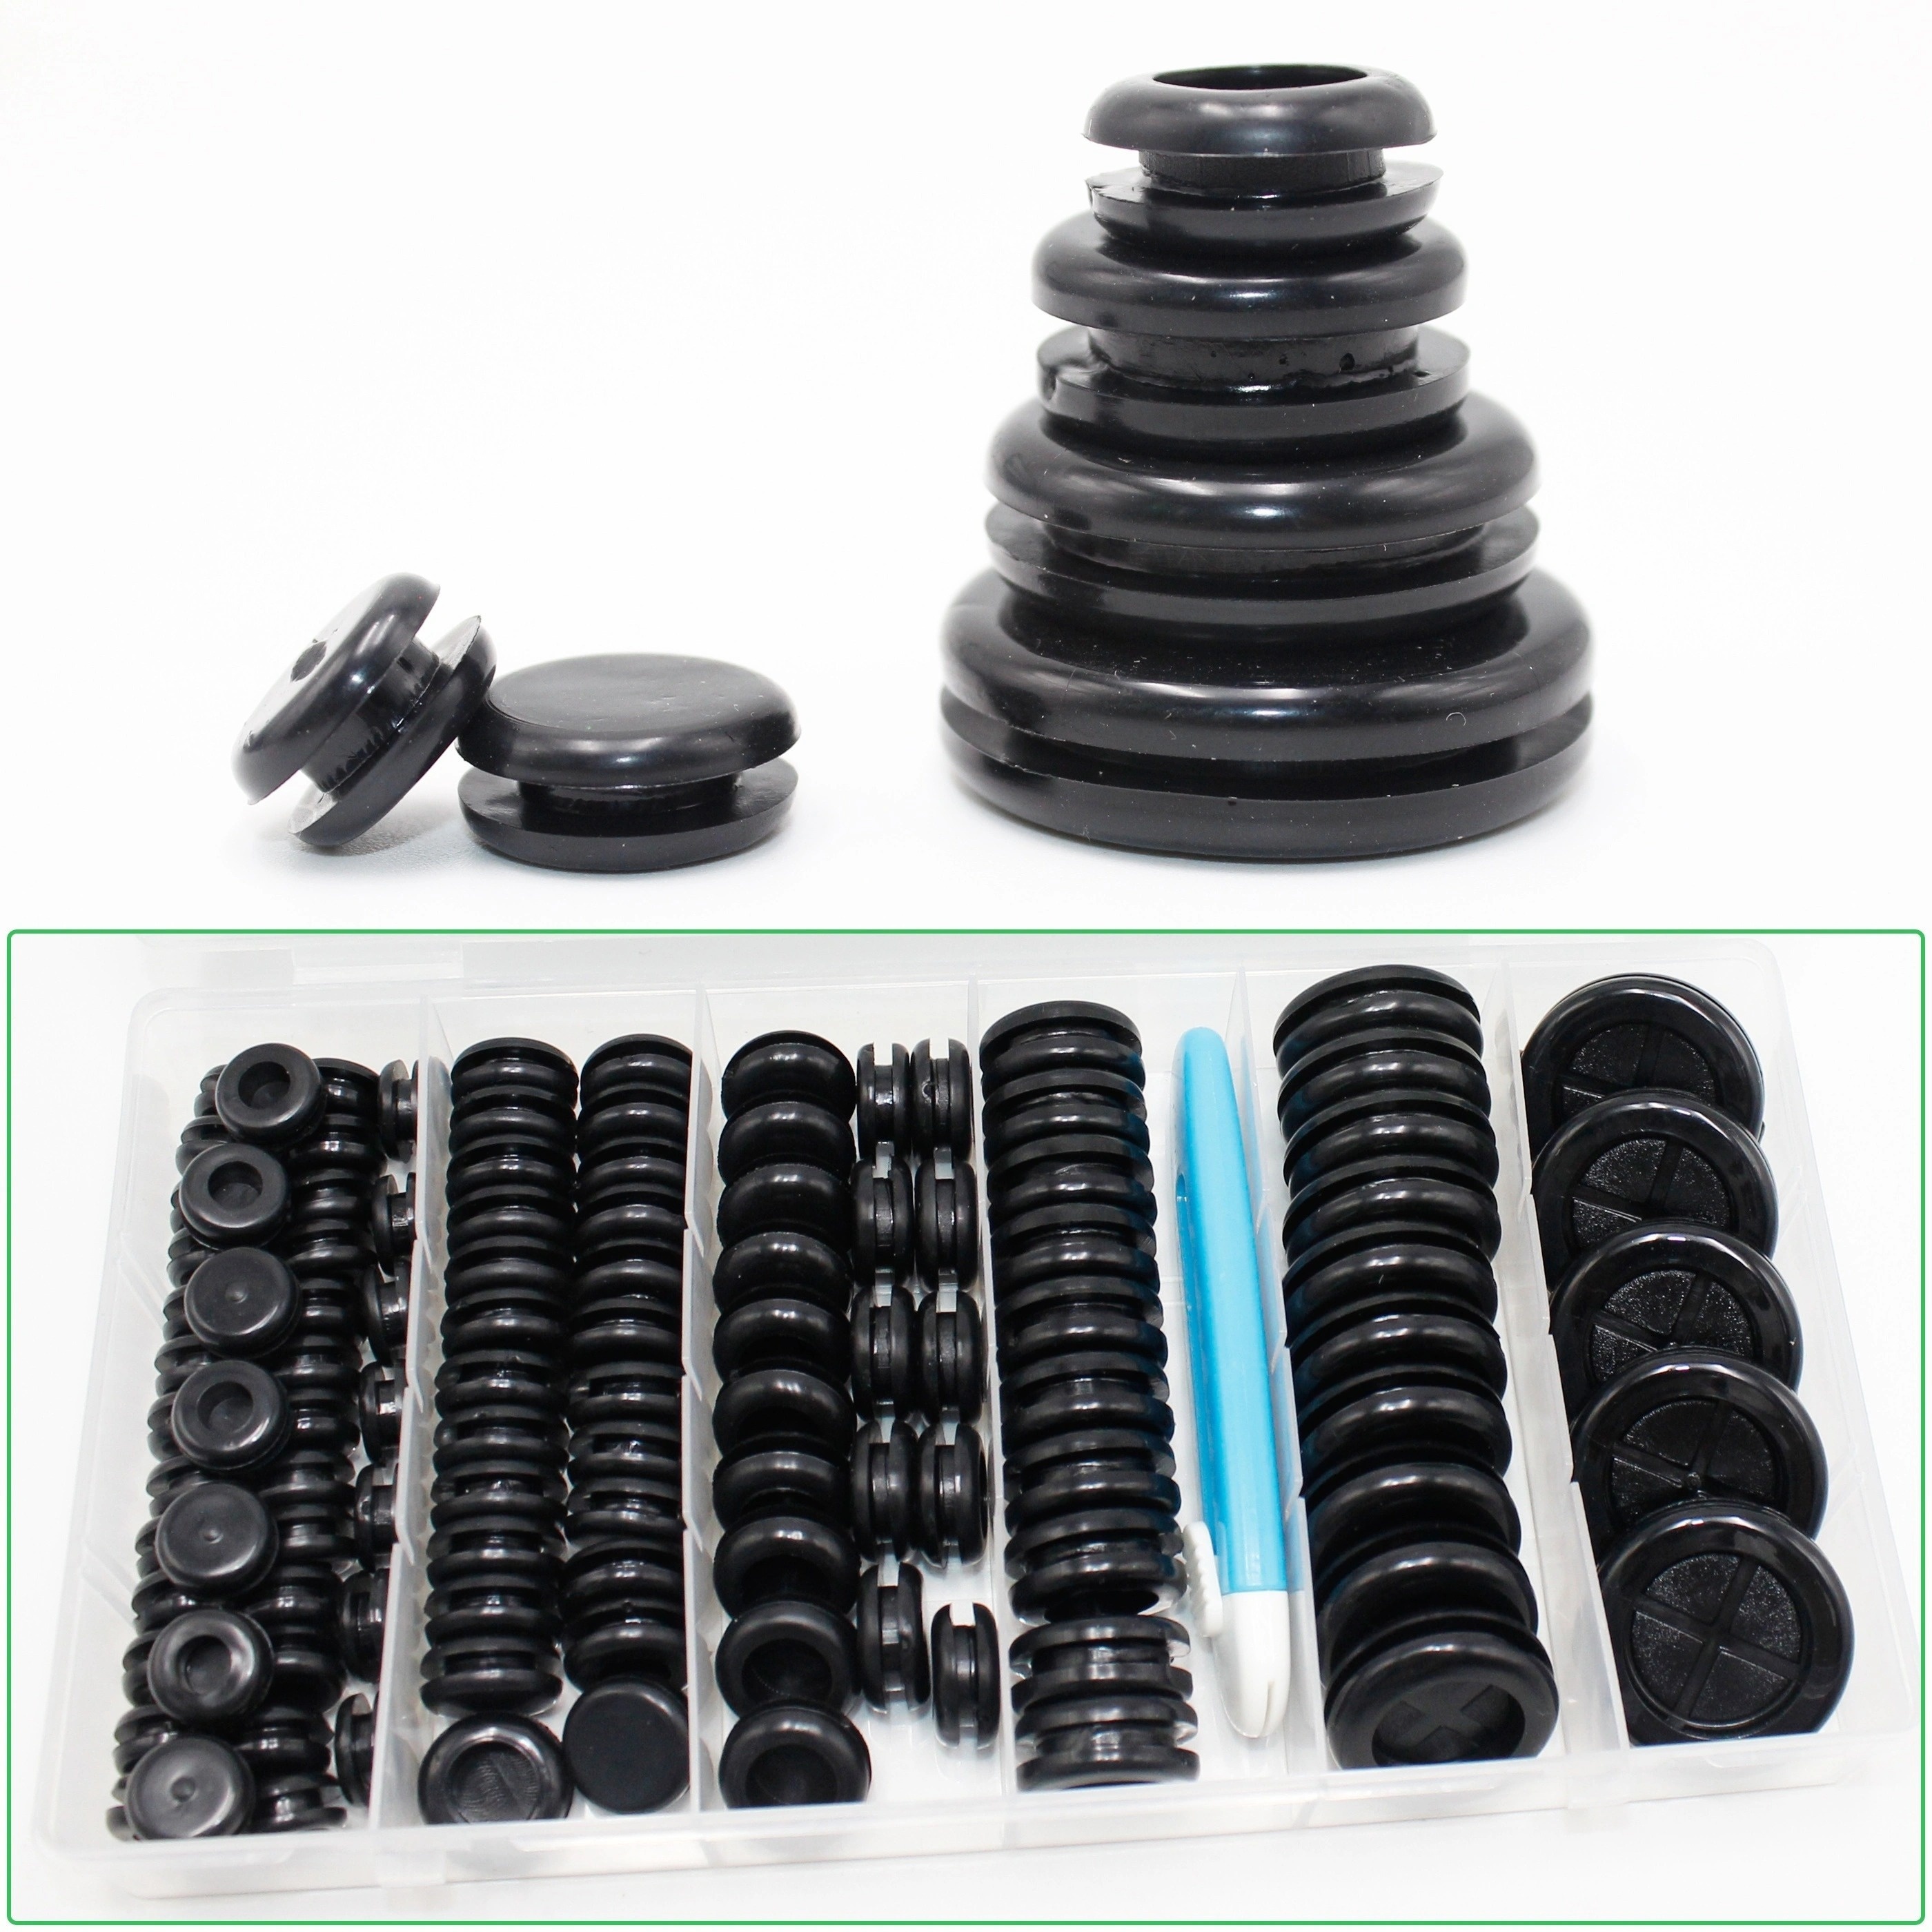 

110pcs Rubber Grommets Kit - Rubber Plugs For Holes Assorted 6 Sizes 5/16" 3/8" 1/2" 5/8" 7/8" 1", Waterproof Firewall Wire Automotive Grommets Set For Sheet Metal, Hardware Repair